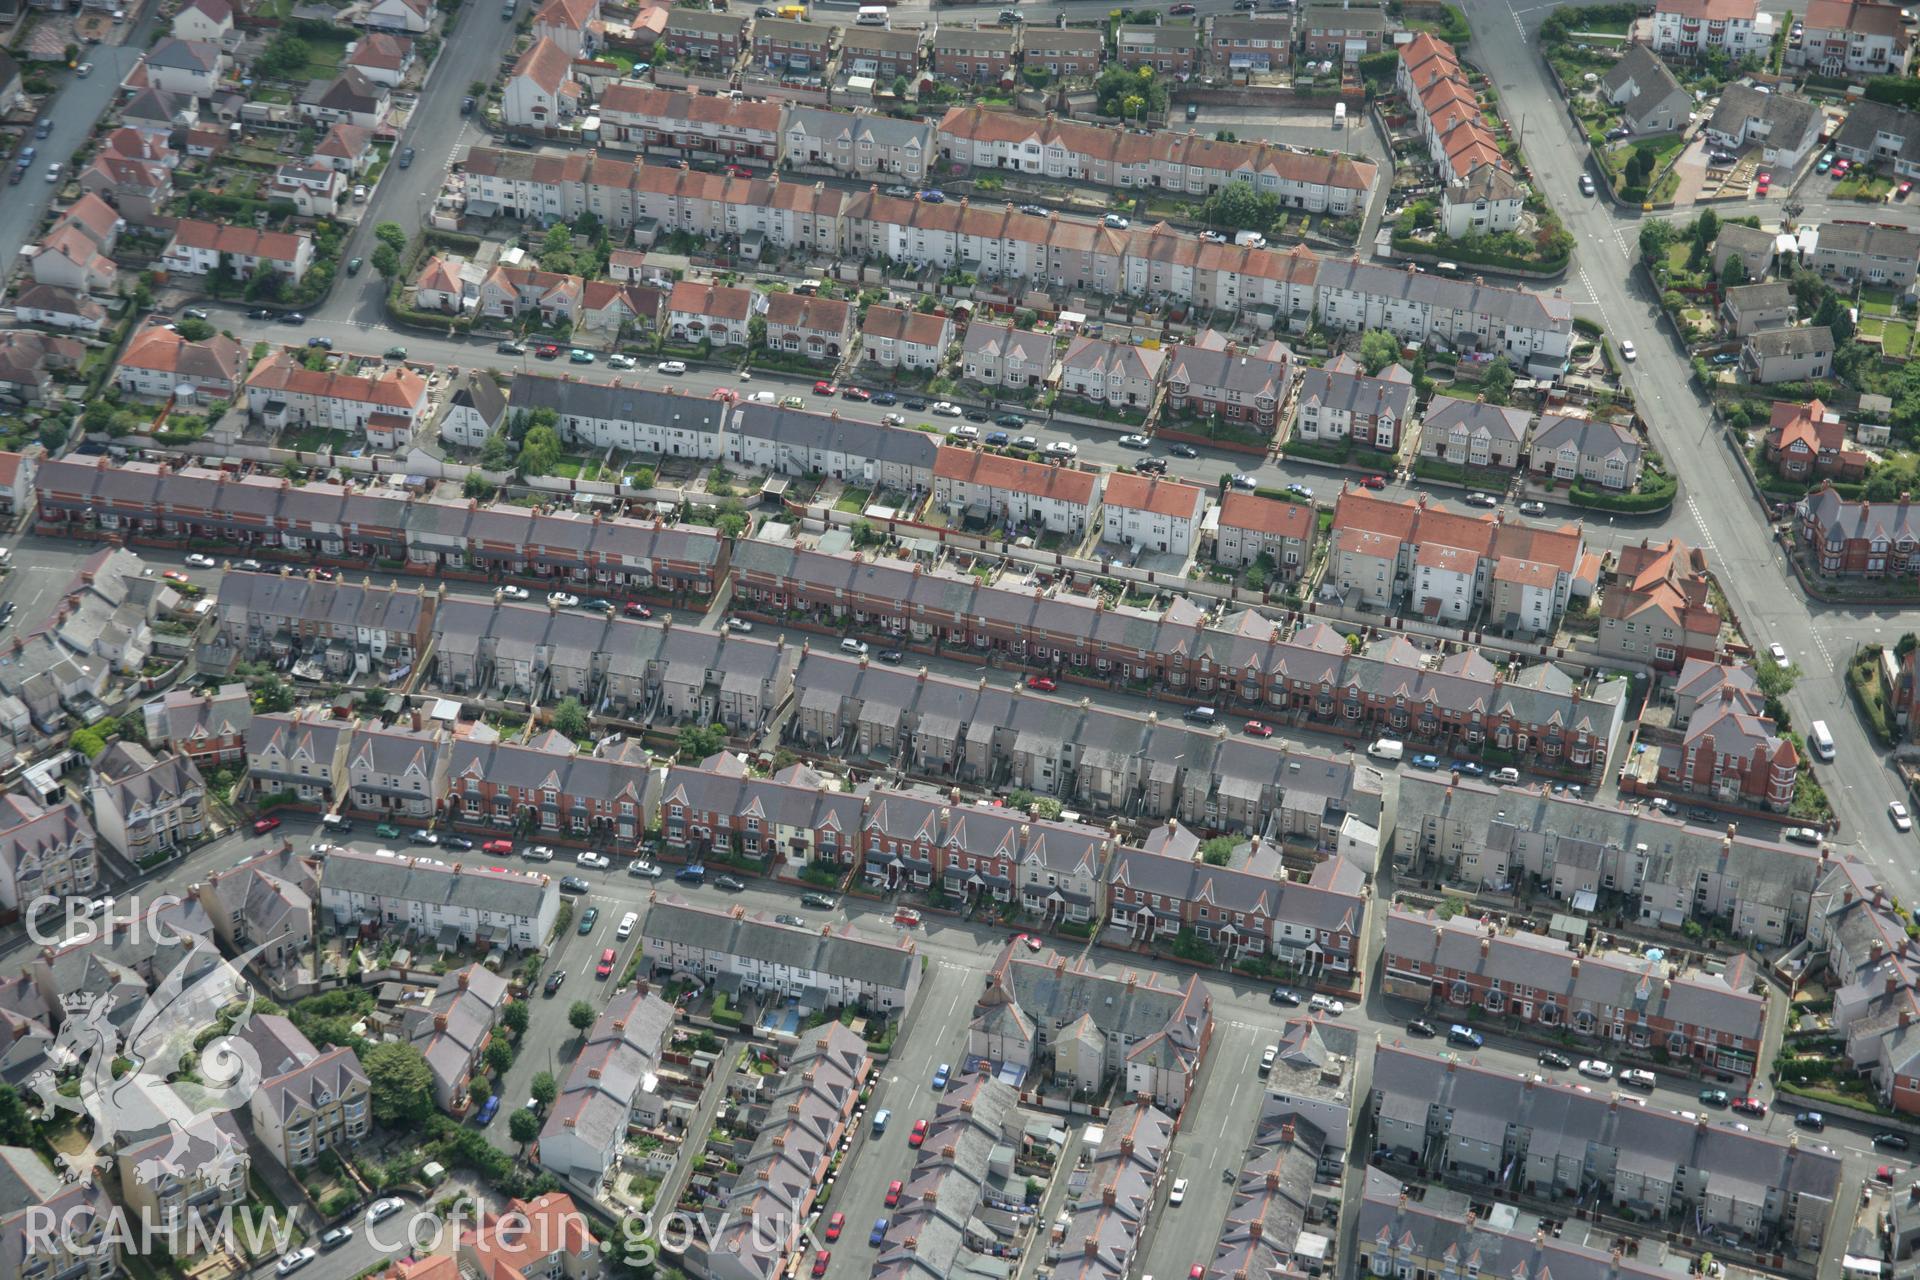 RCAHMW colour oblique aerial photograph of housing in Colwyn Bay. Taken on 14 August 2006 by Toby Driver.